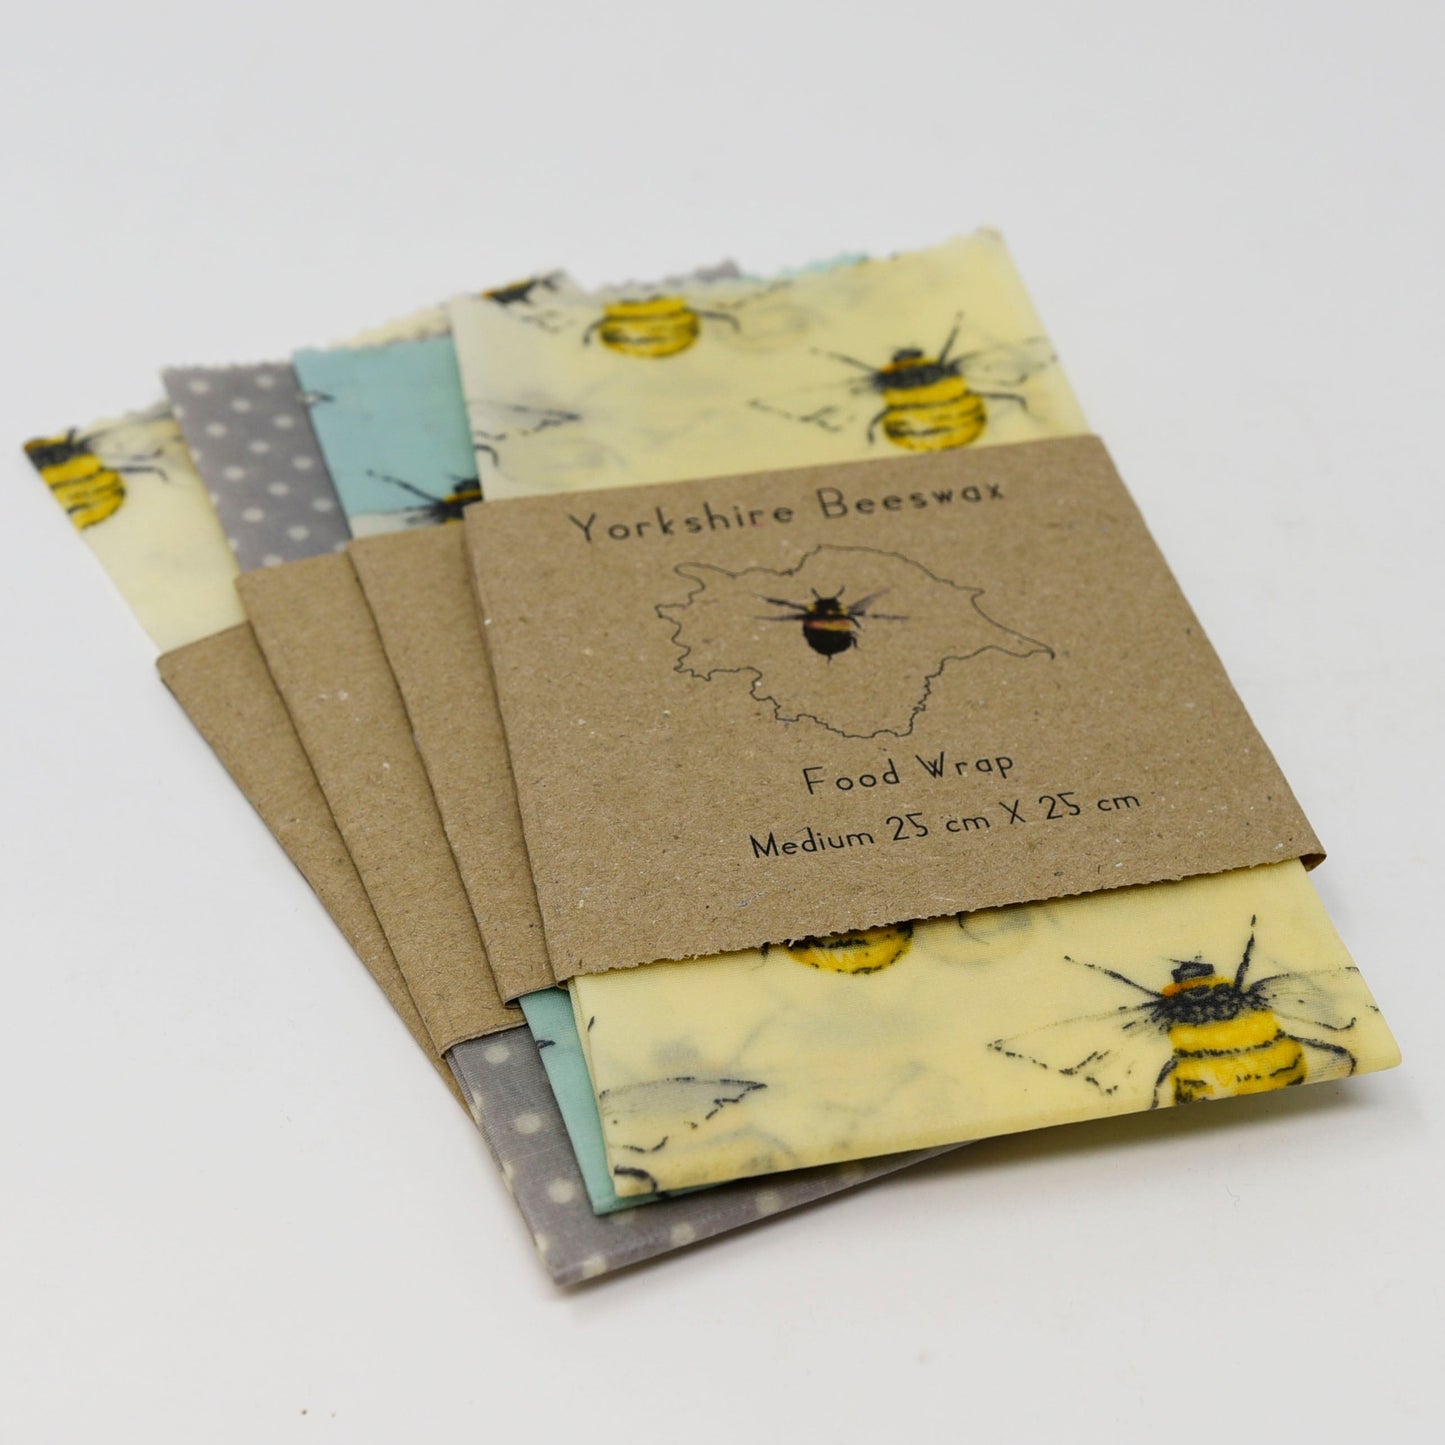 Wax Food Wraps by Yorkshire Beeswax M